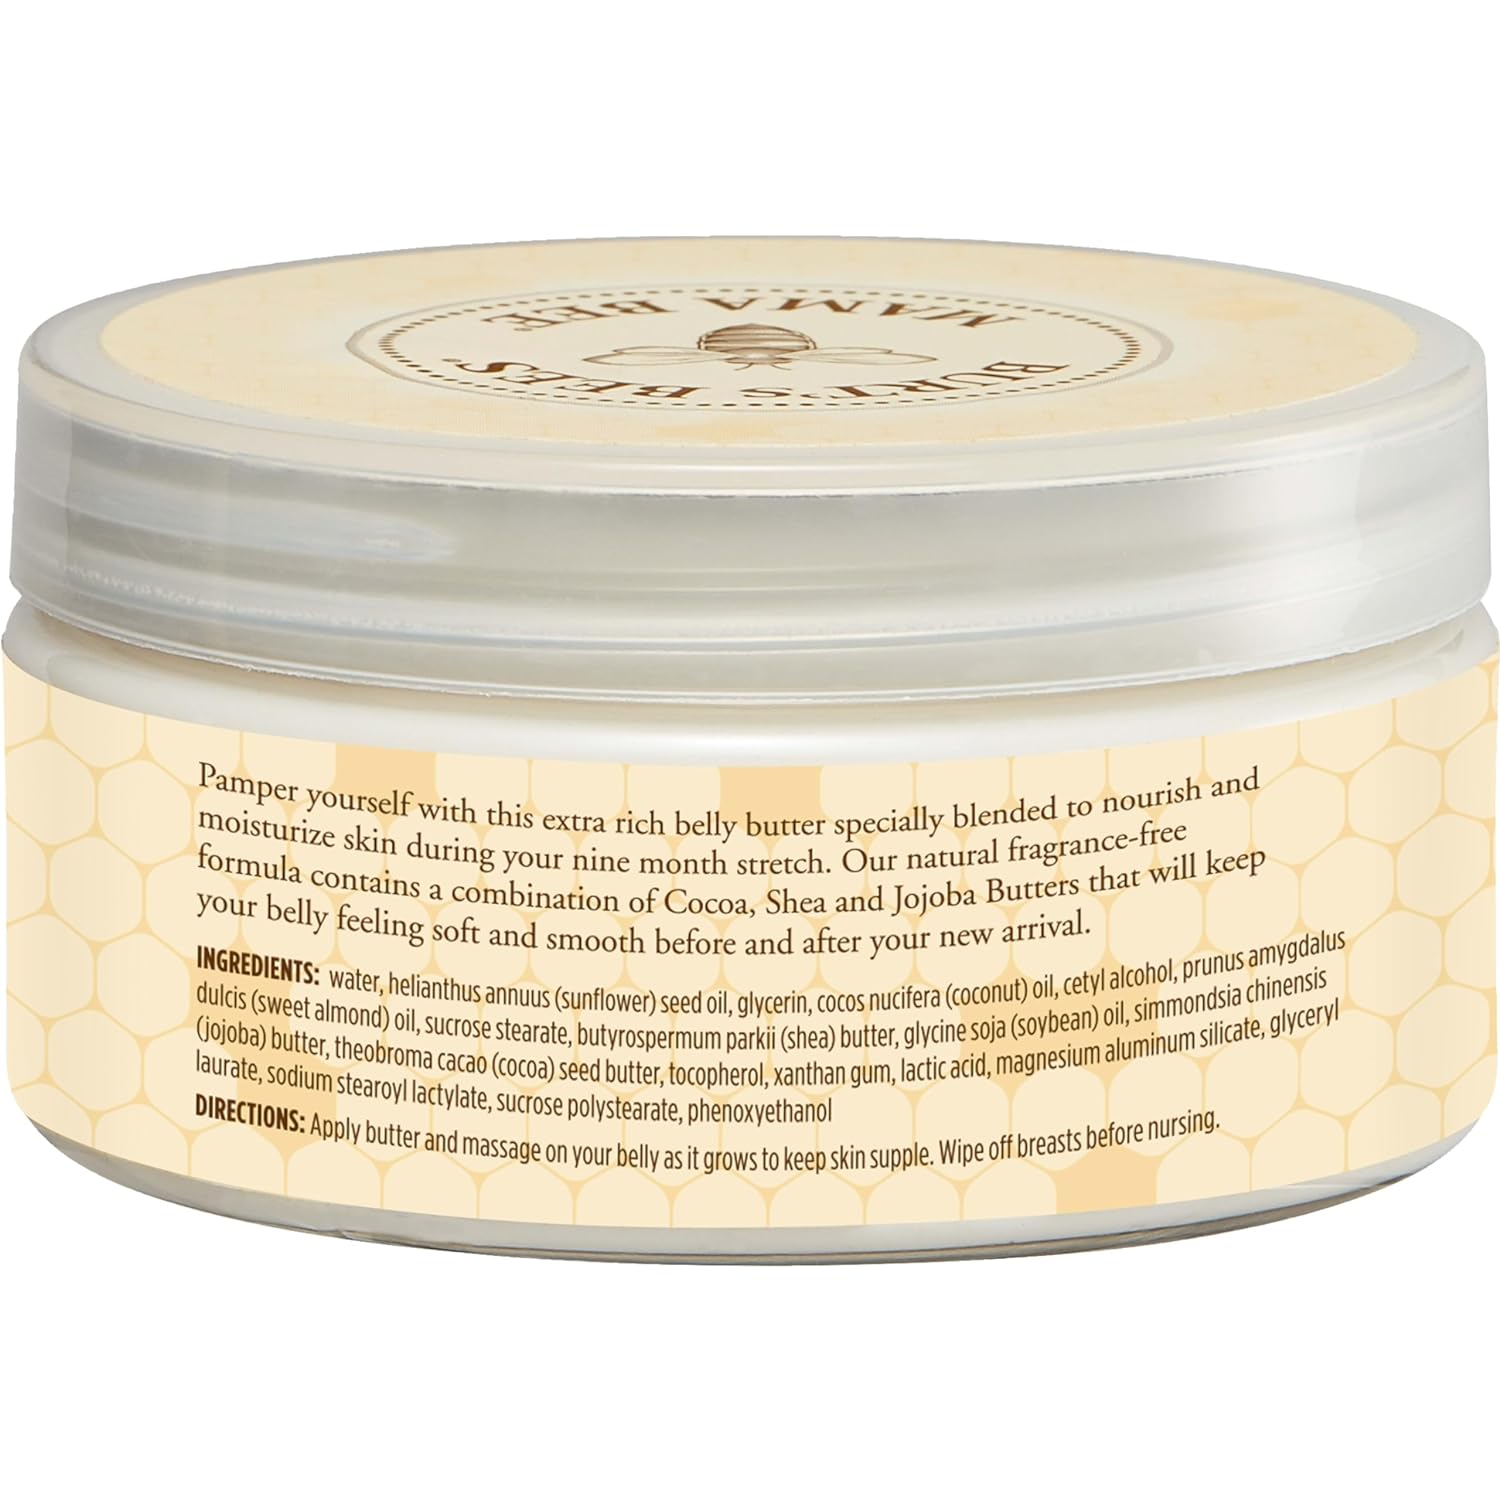 Burt's Bees Mama Bee Belly Butter, Fragrance Free Lotion, 6.5 Ounce Tub : Beauty & Personal Care